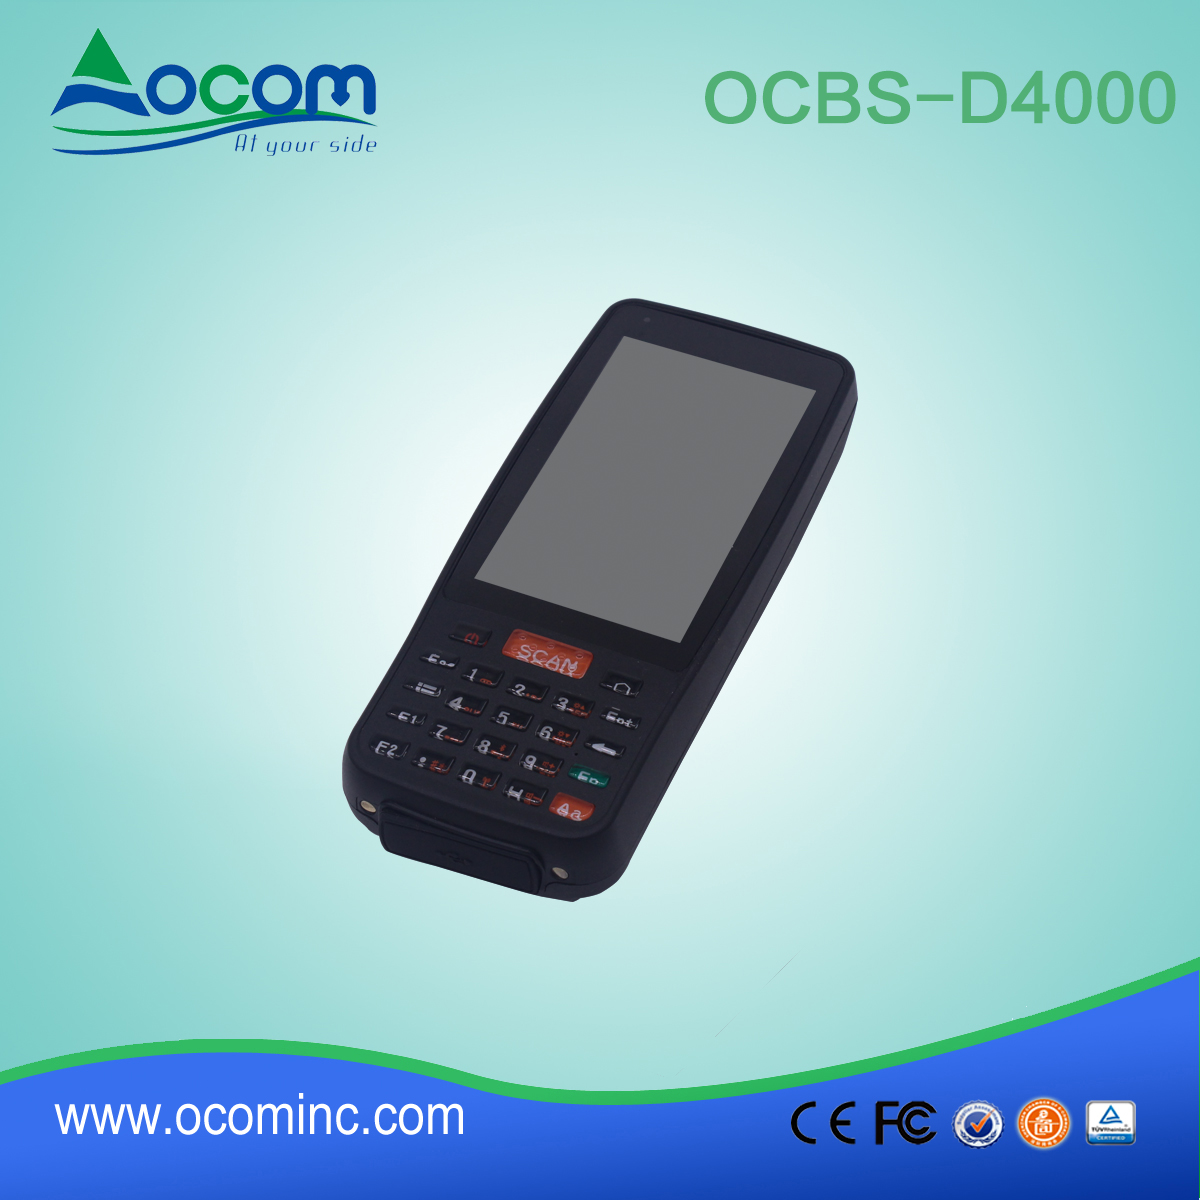 OCBS-D4000 Handheld Android Mobile PDA Apparaat Barcodescanner PDA